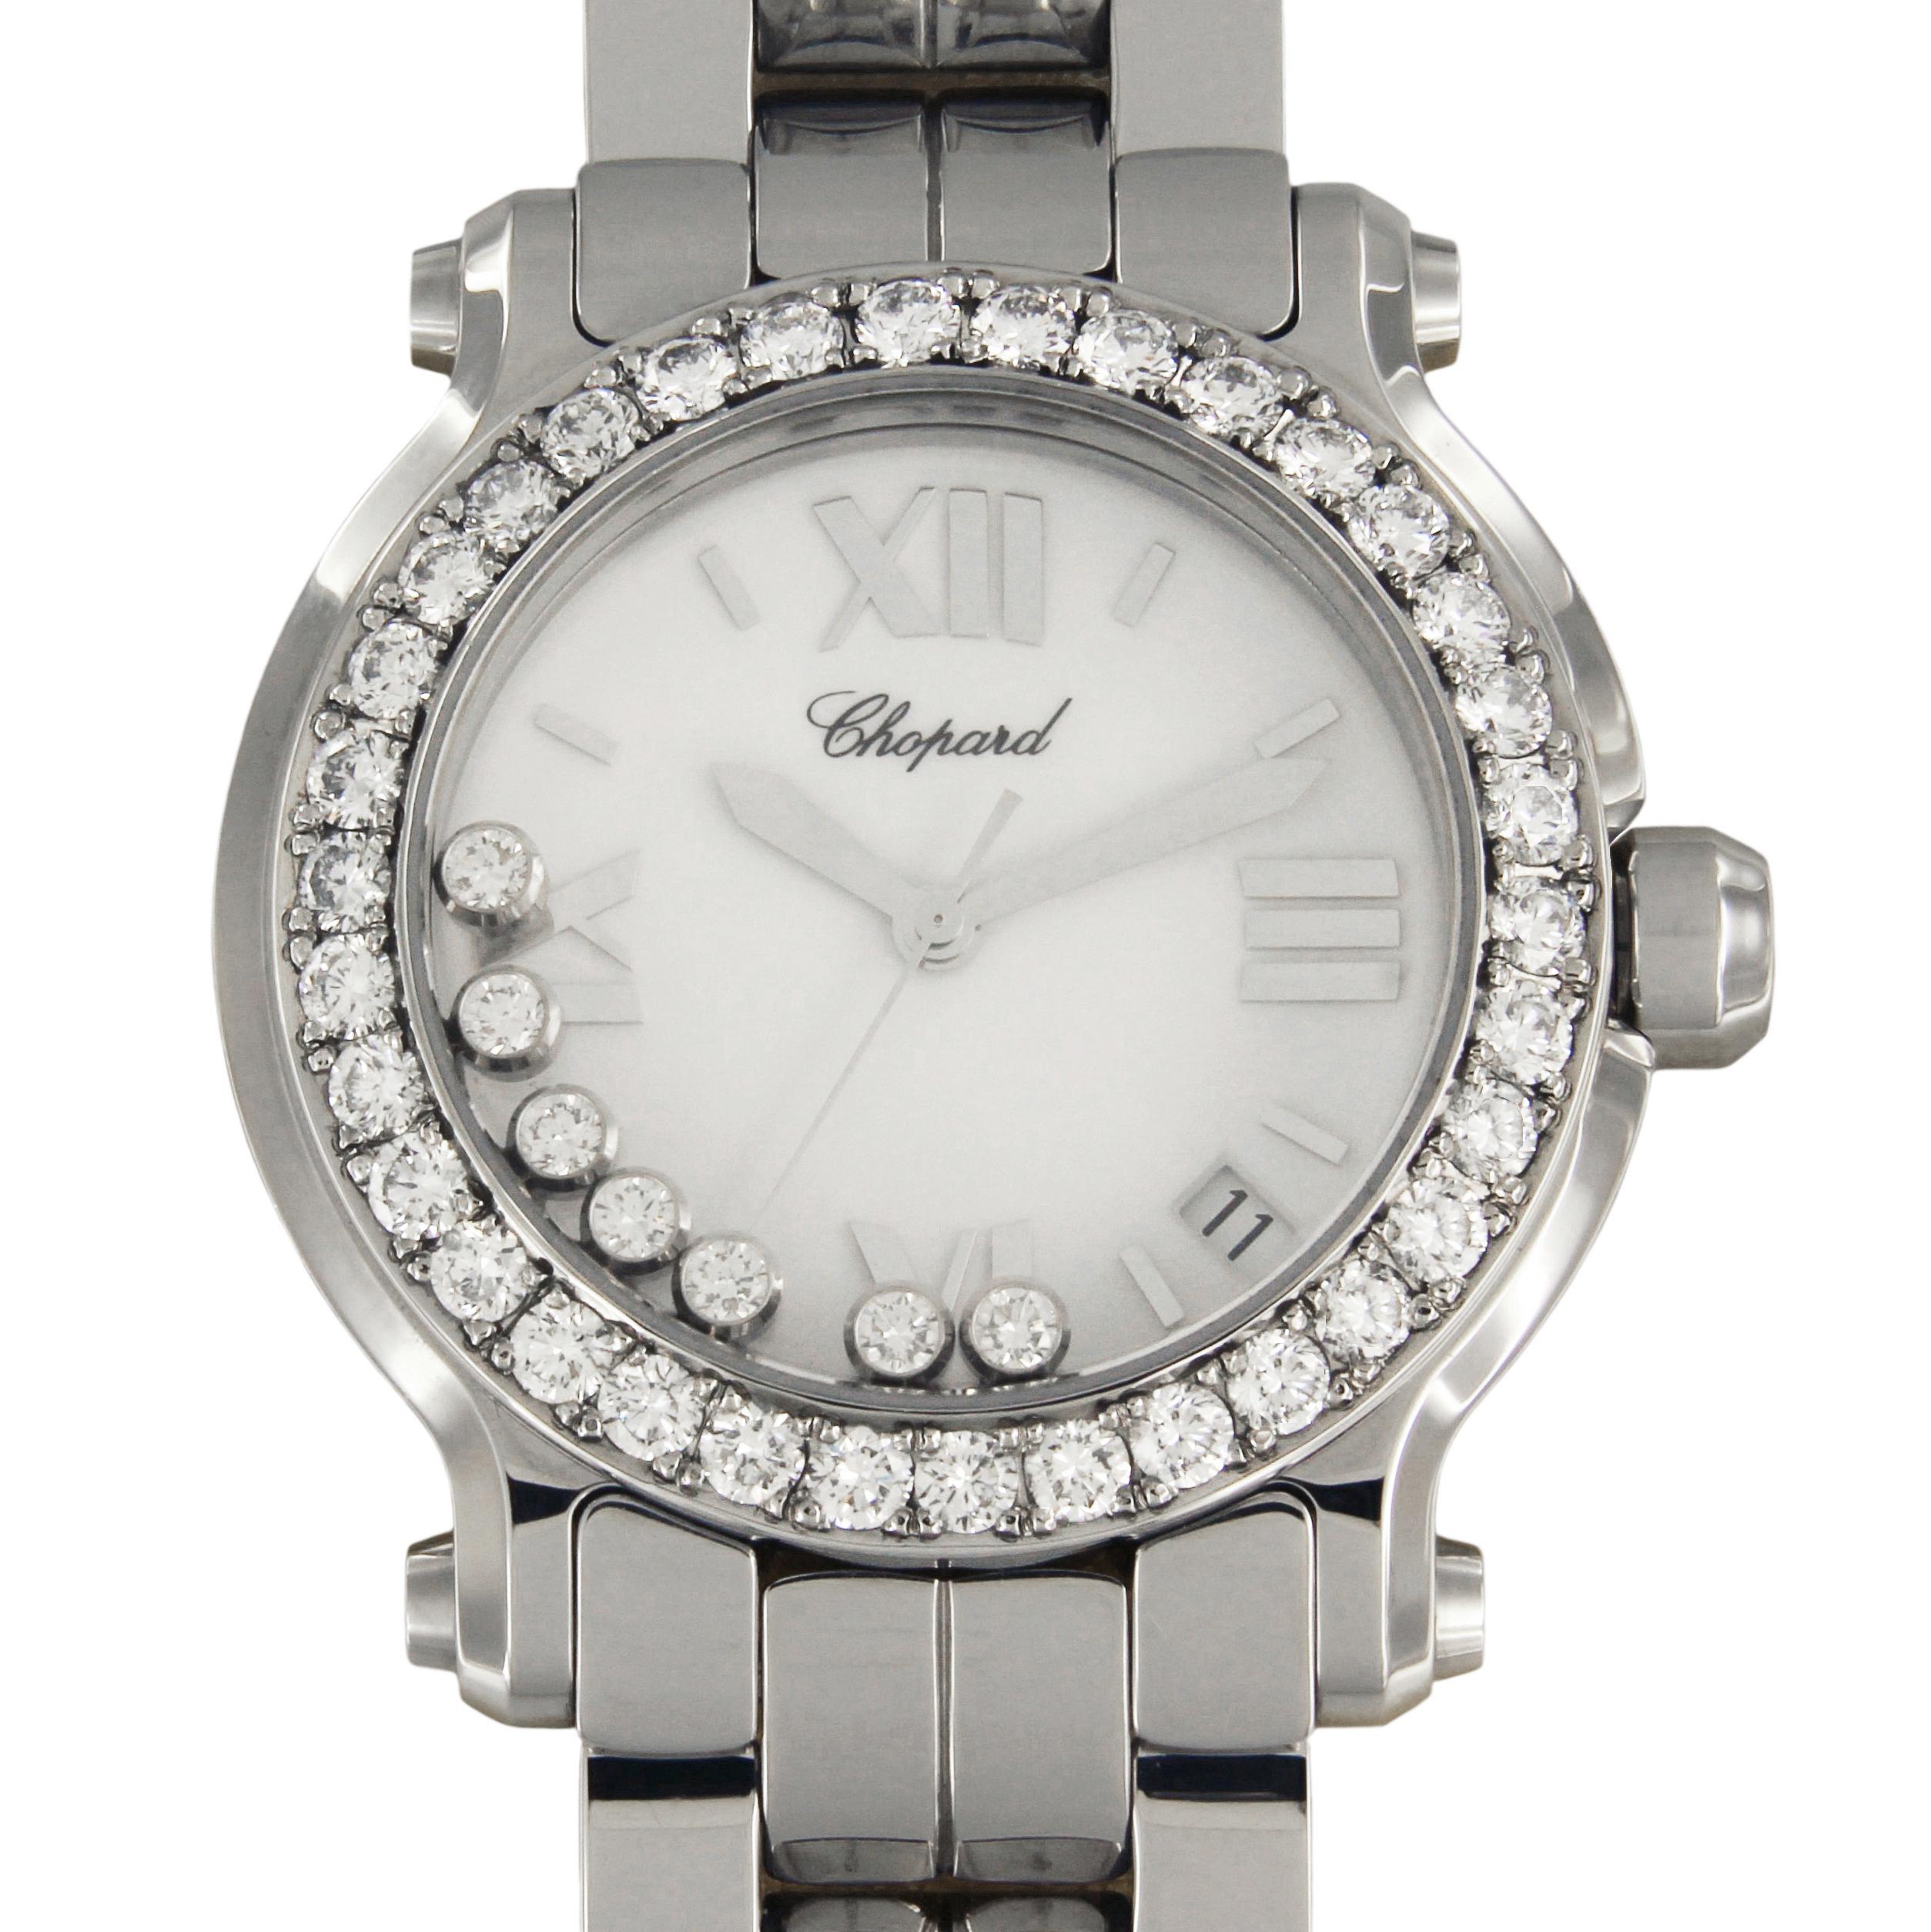 CHOPARD HAPPY SPORT 7 FLOATING DIAMONDS WATCH WITH DIAMOND BEZEL 278477-3002

-Movement: Swiss Quartz
-Case Size: 36mm
-Material: Stainless Steel
-Crystal: Scratch Resistant Sapphire
-Aftermarket Diamond Bezel
-Dial: White Matte Dial with 7 Floating